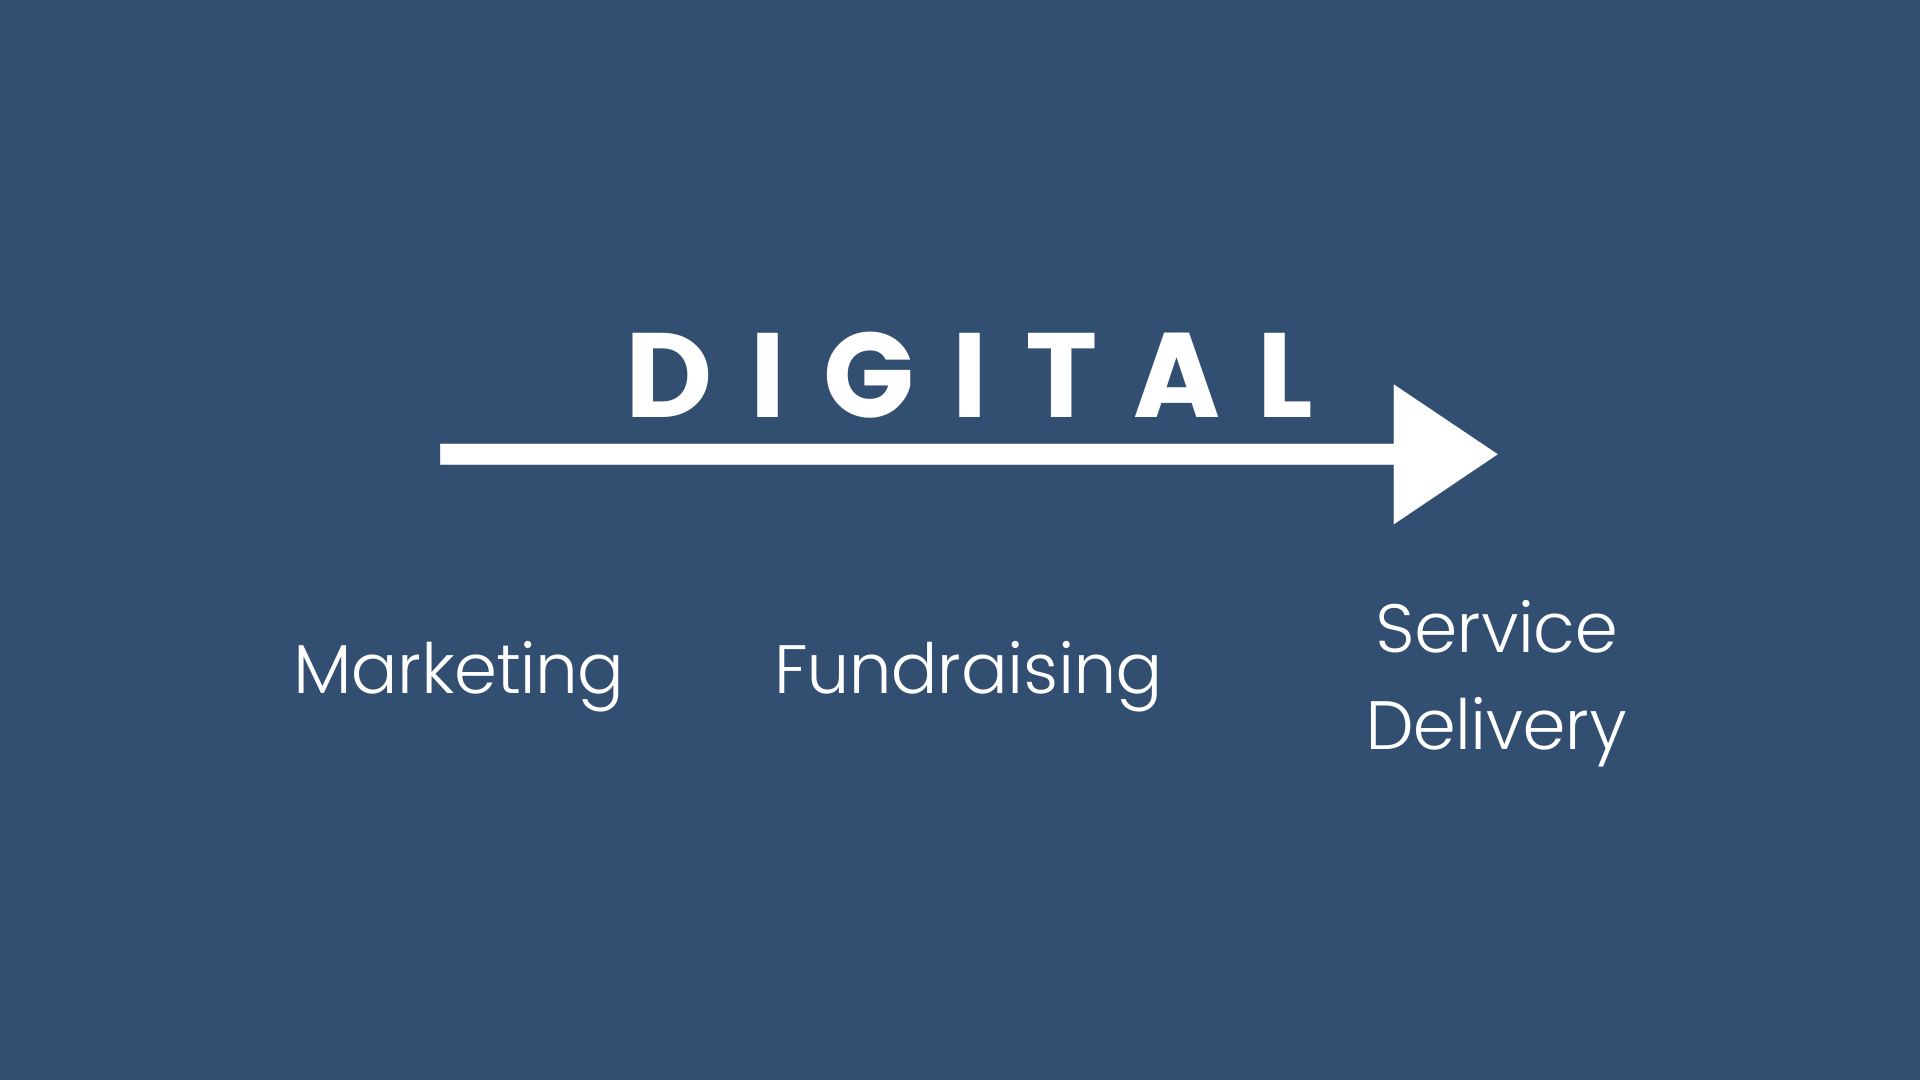 graphic showing a right-pointing arrow with the word 'digital' underneath the arrow, from left to right, are 'marketing' 'fundraising' and 'service delivery'